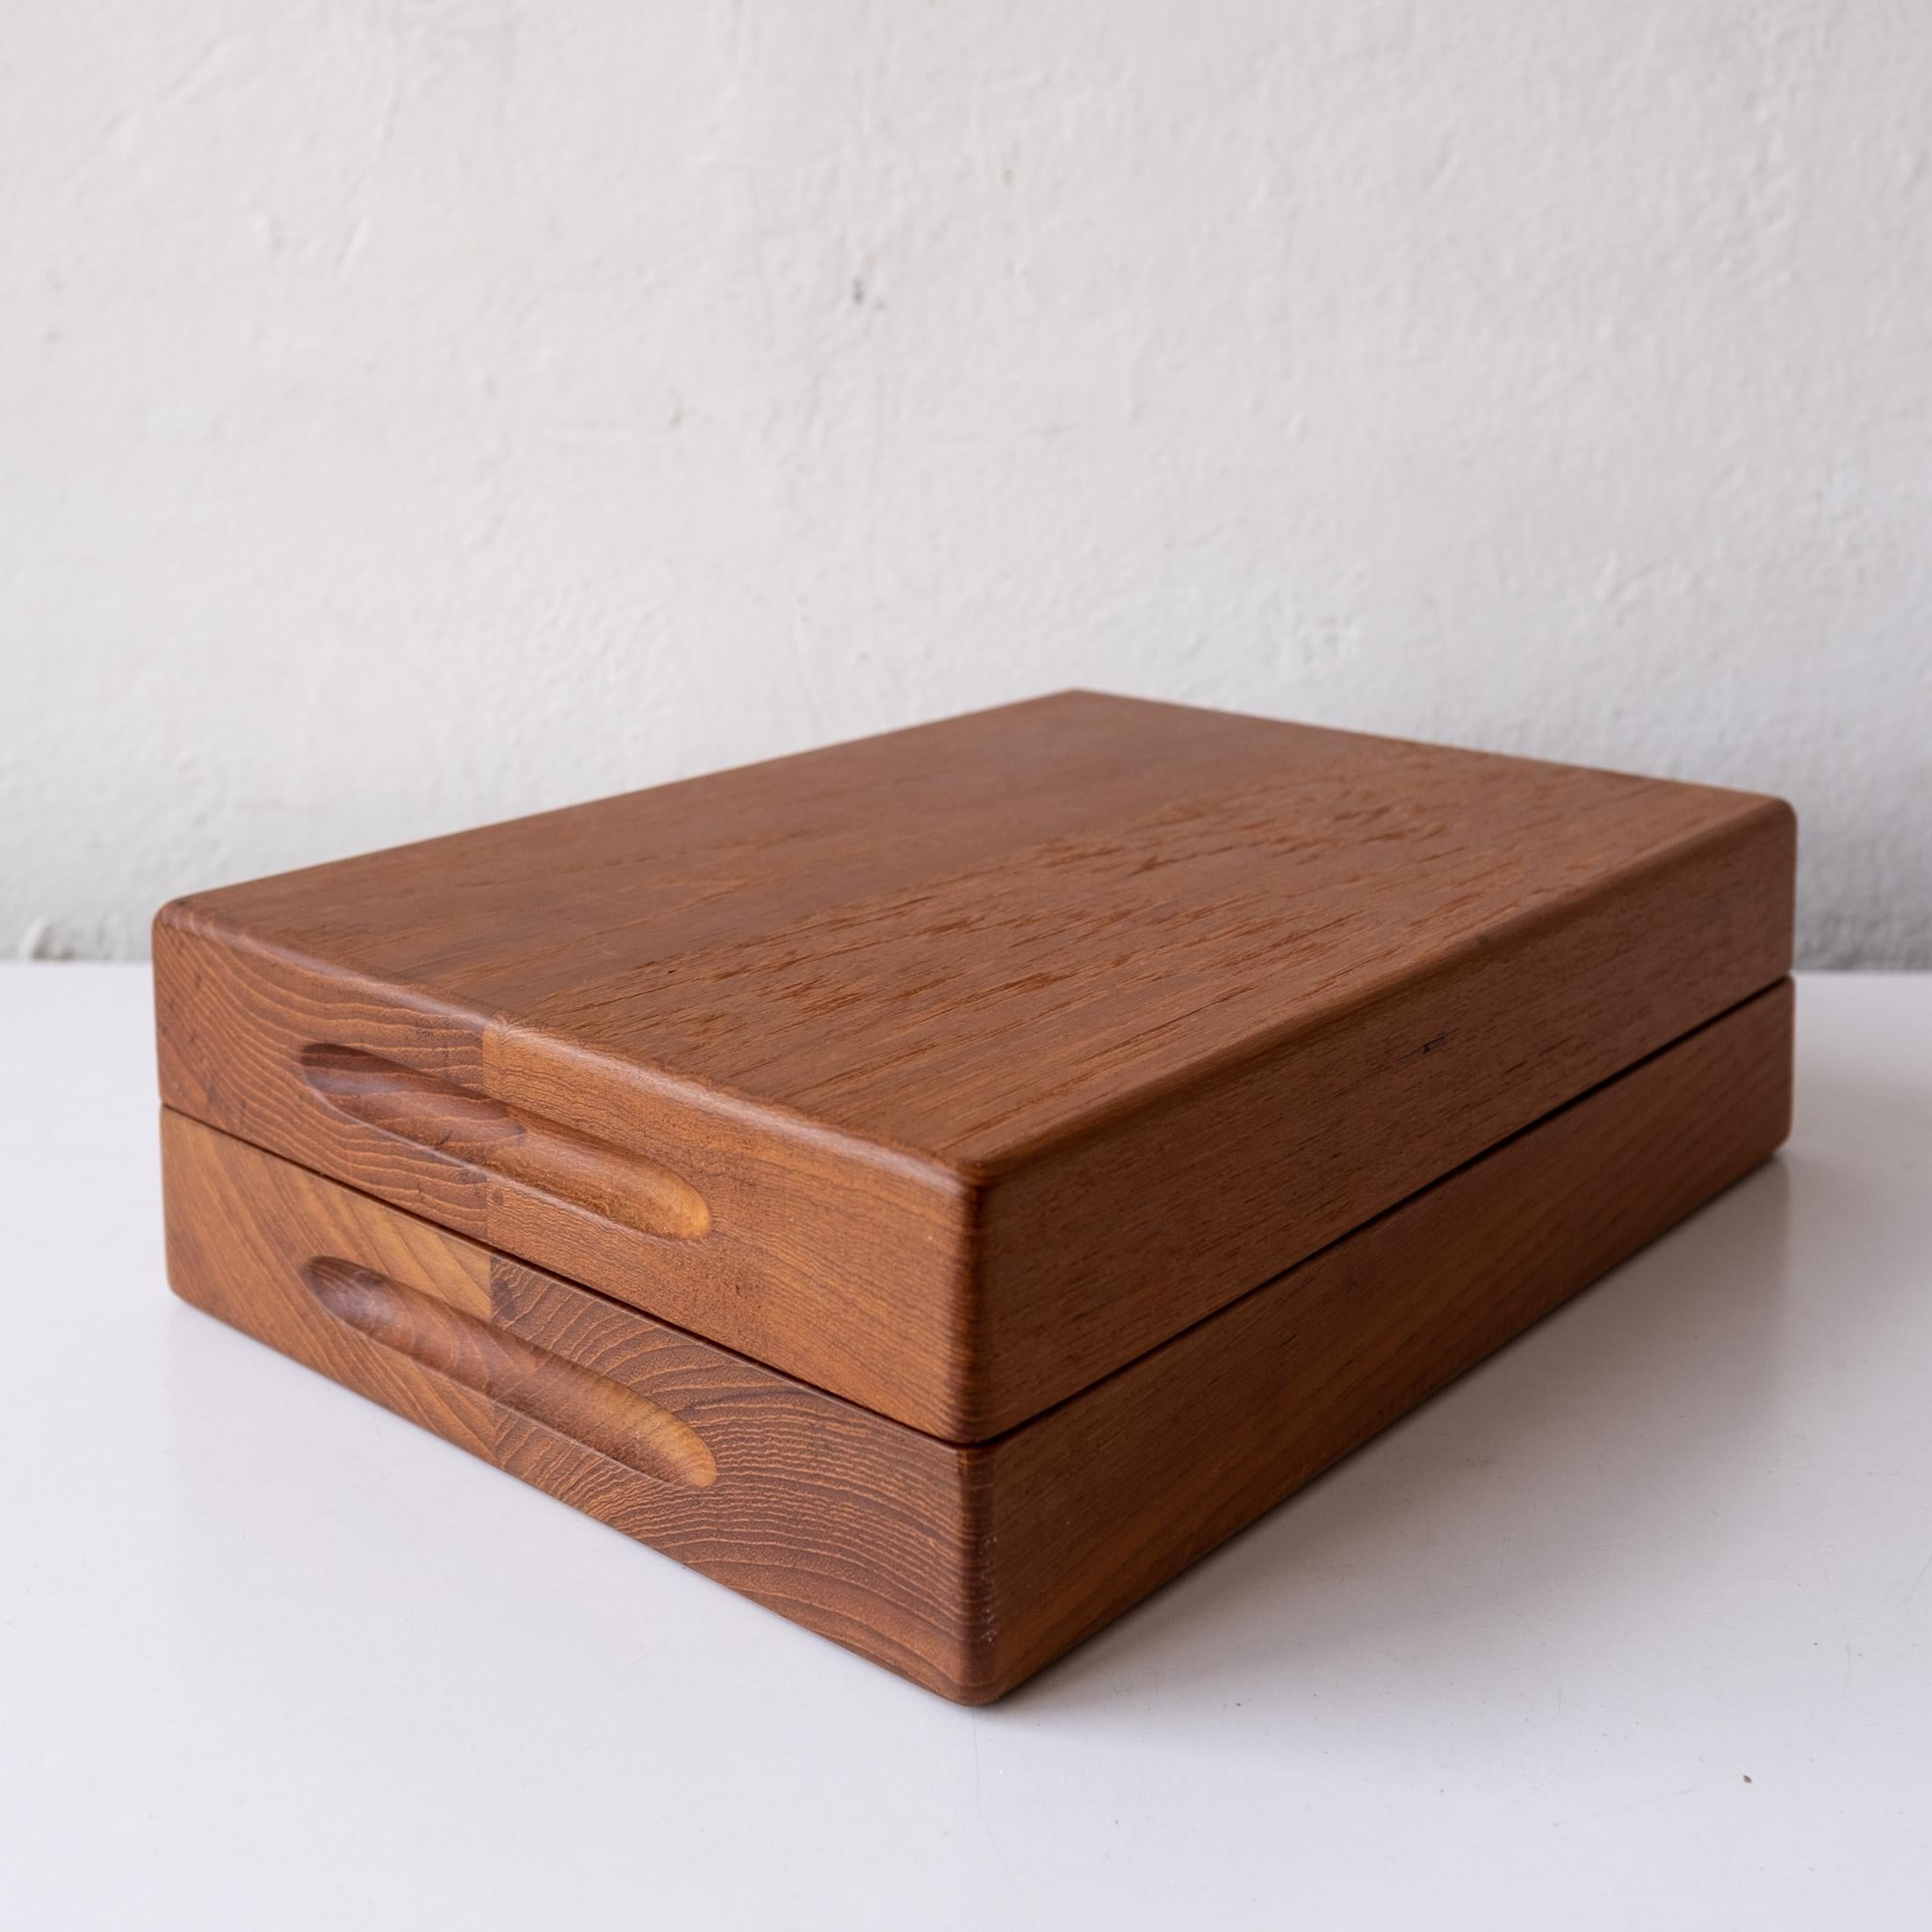 Beautifully-crafted solid teak valet box, jewelry tray and catch all. High quality brass fittings. Denmark, 1960s.